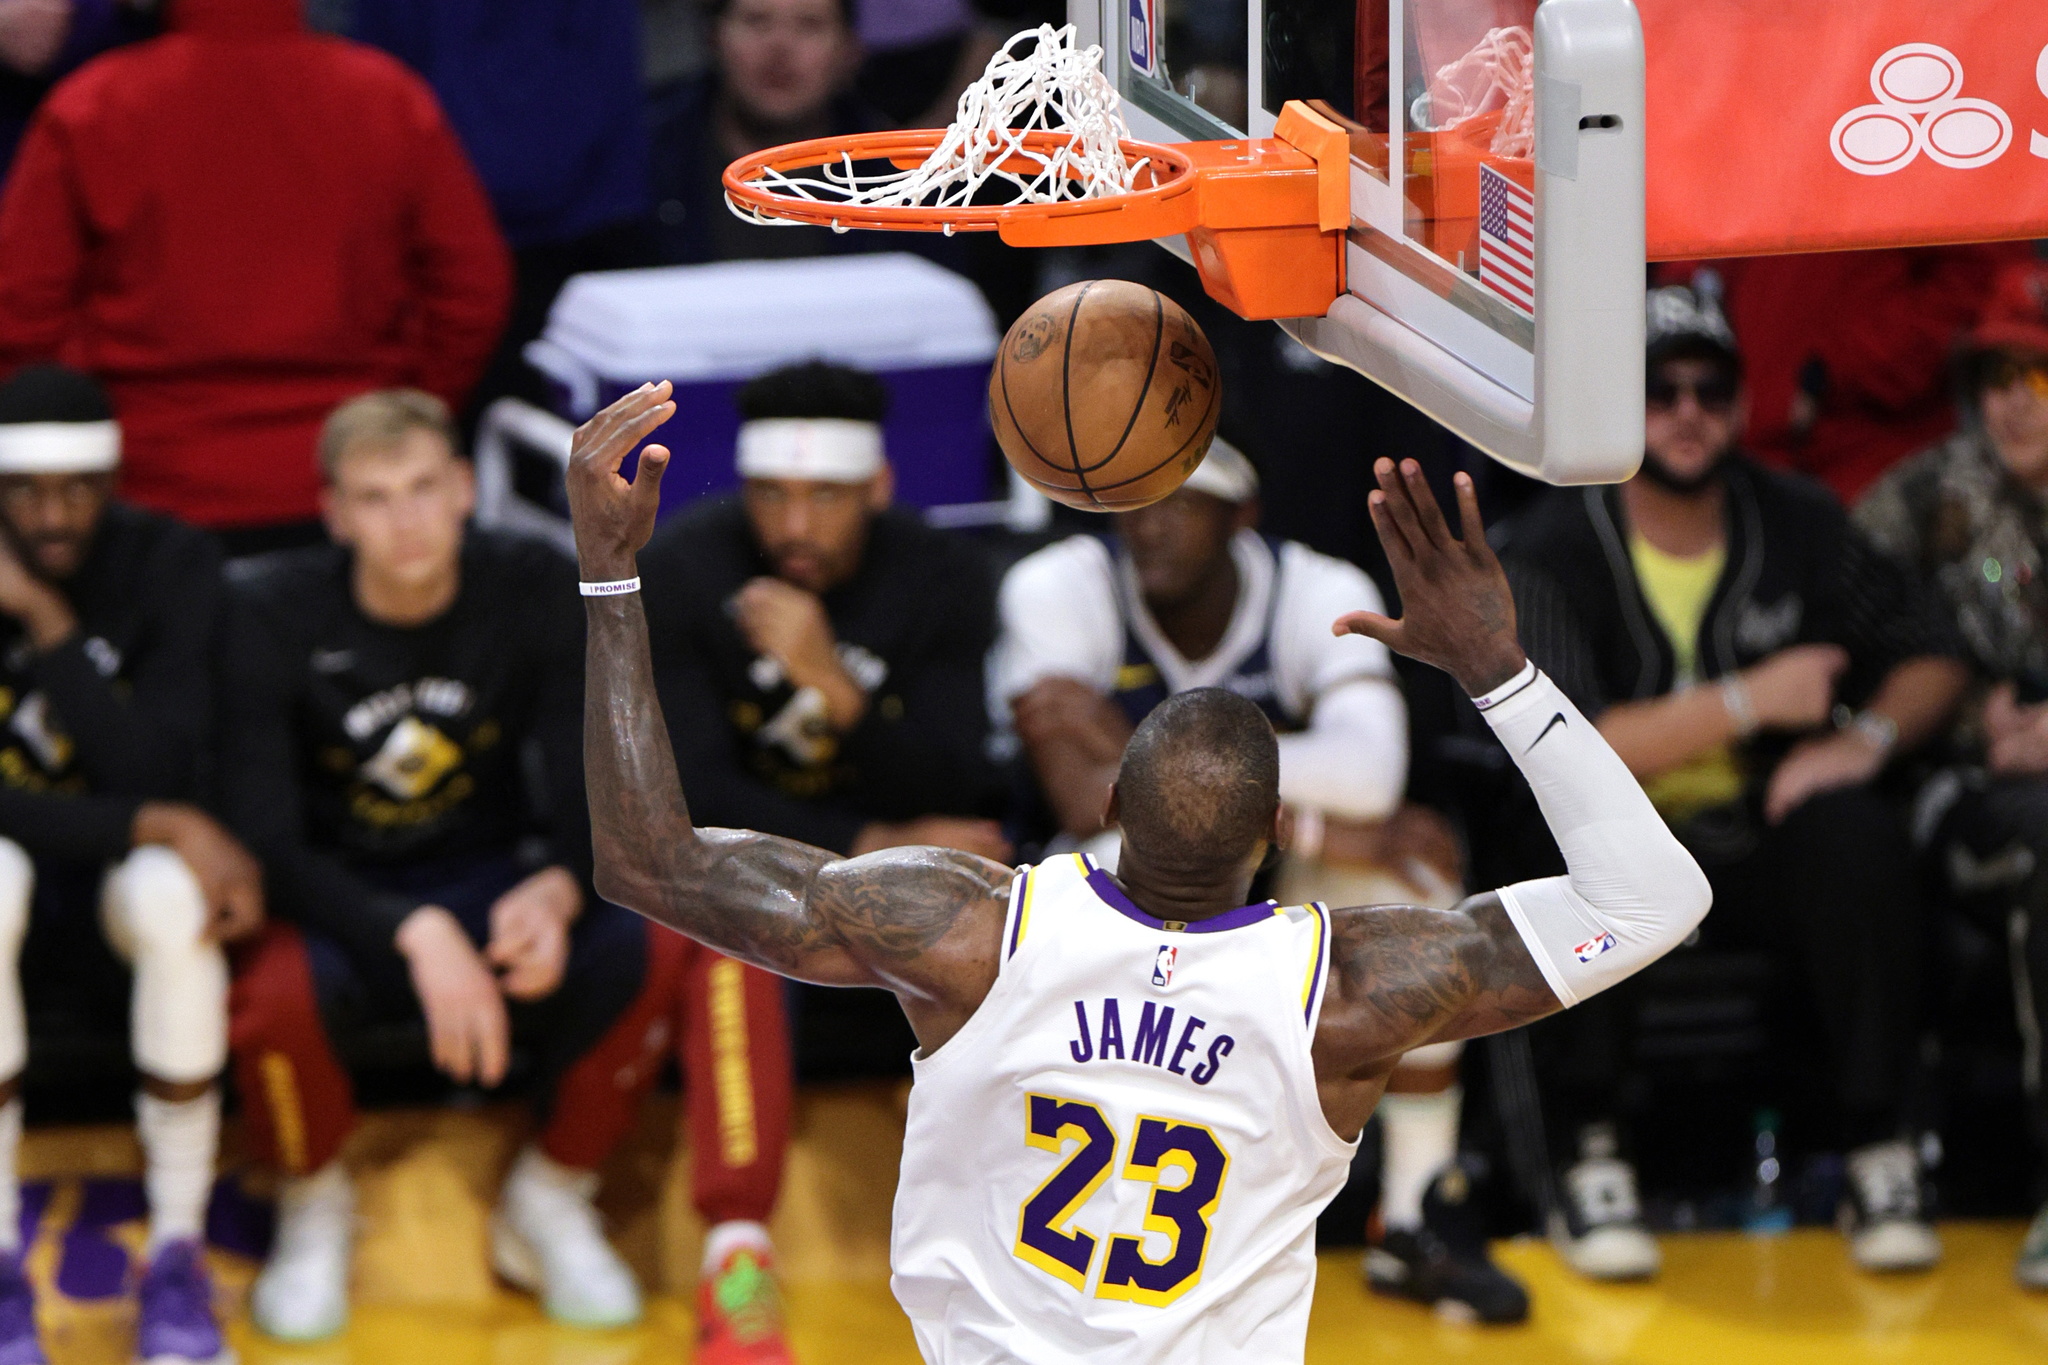 Bryce James hint about the end of the LeBron and Anthony Davis era on the Lakers that may not sit well with his father